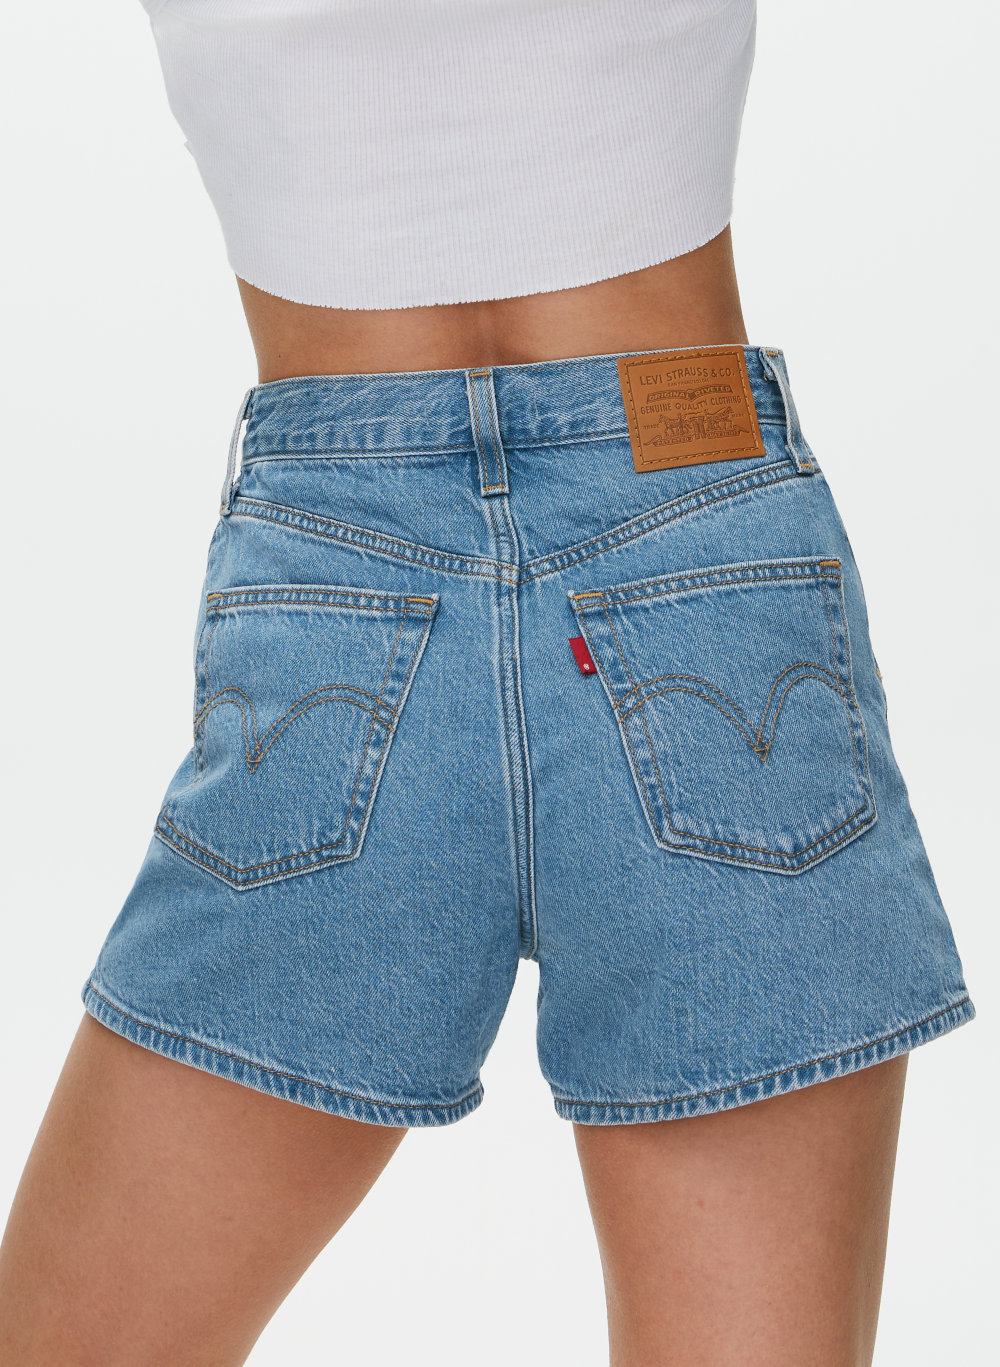 where to buy high waisted levi shorts